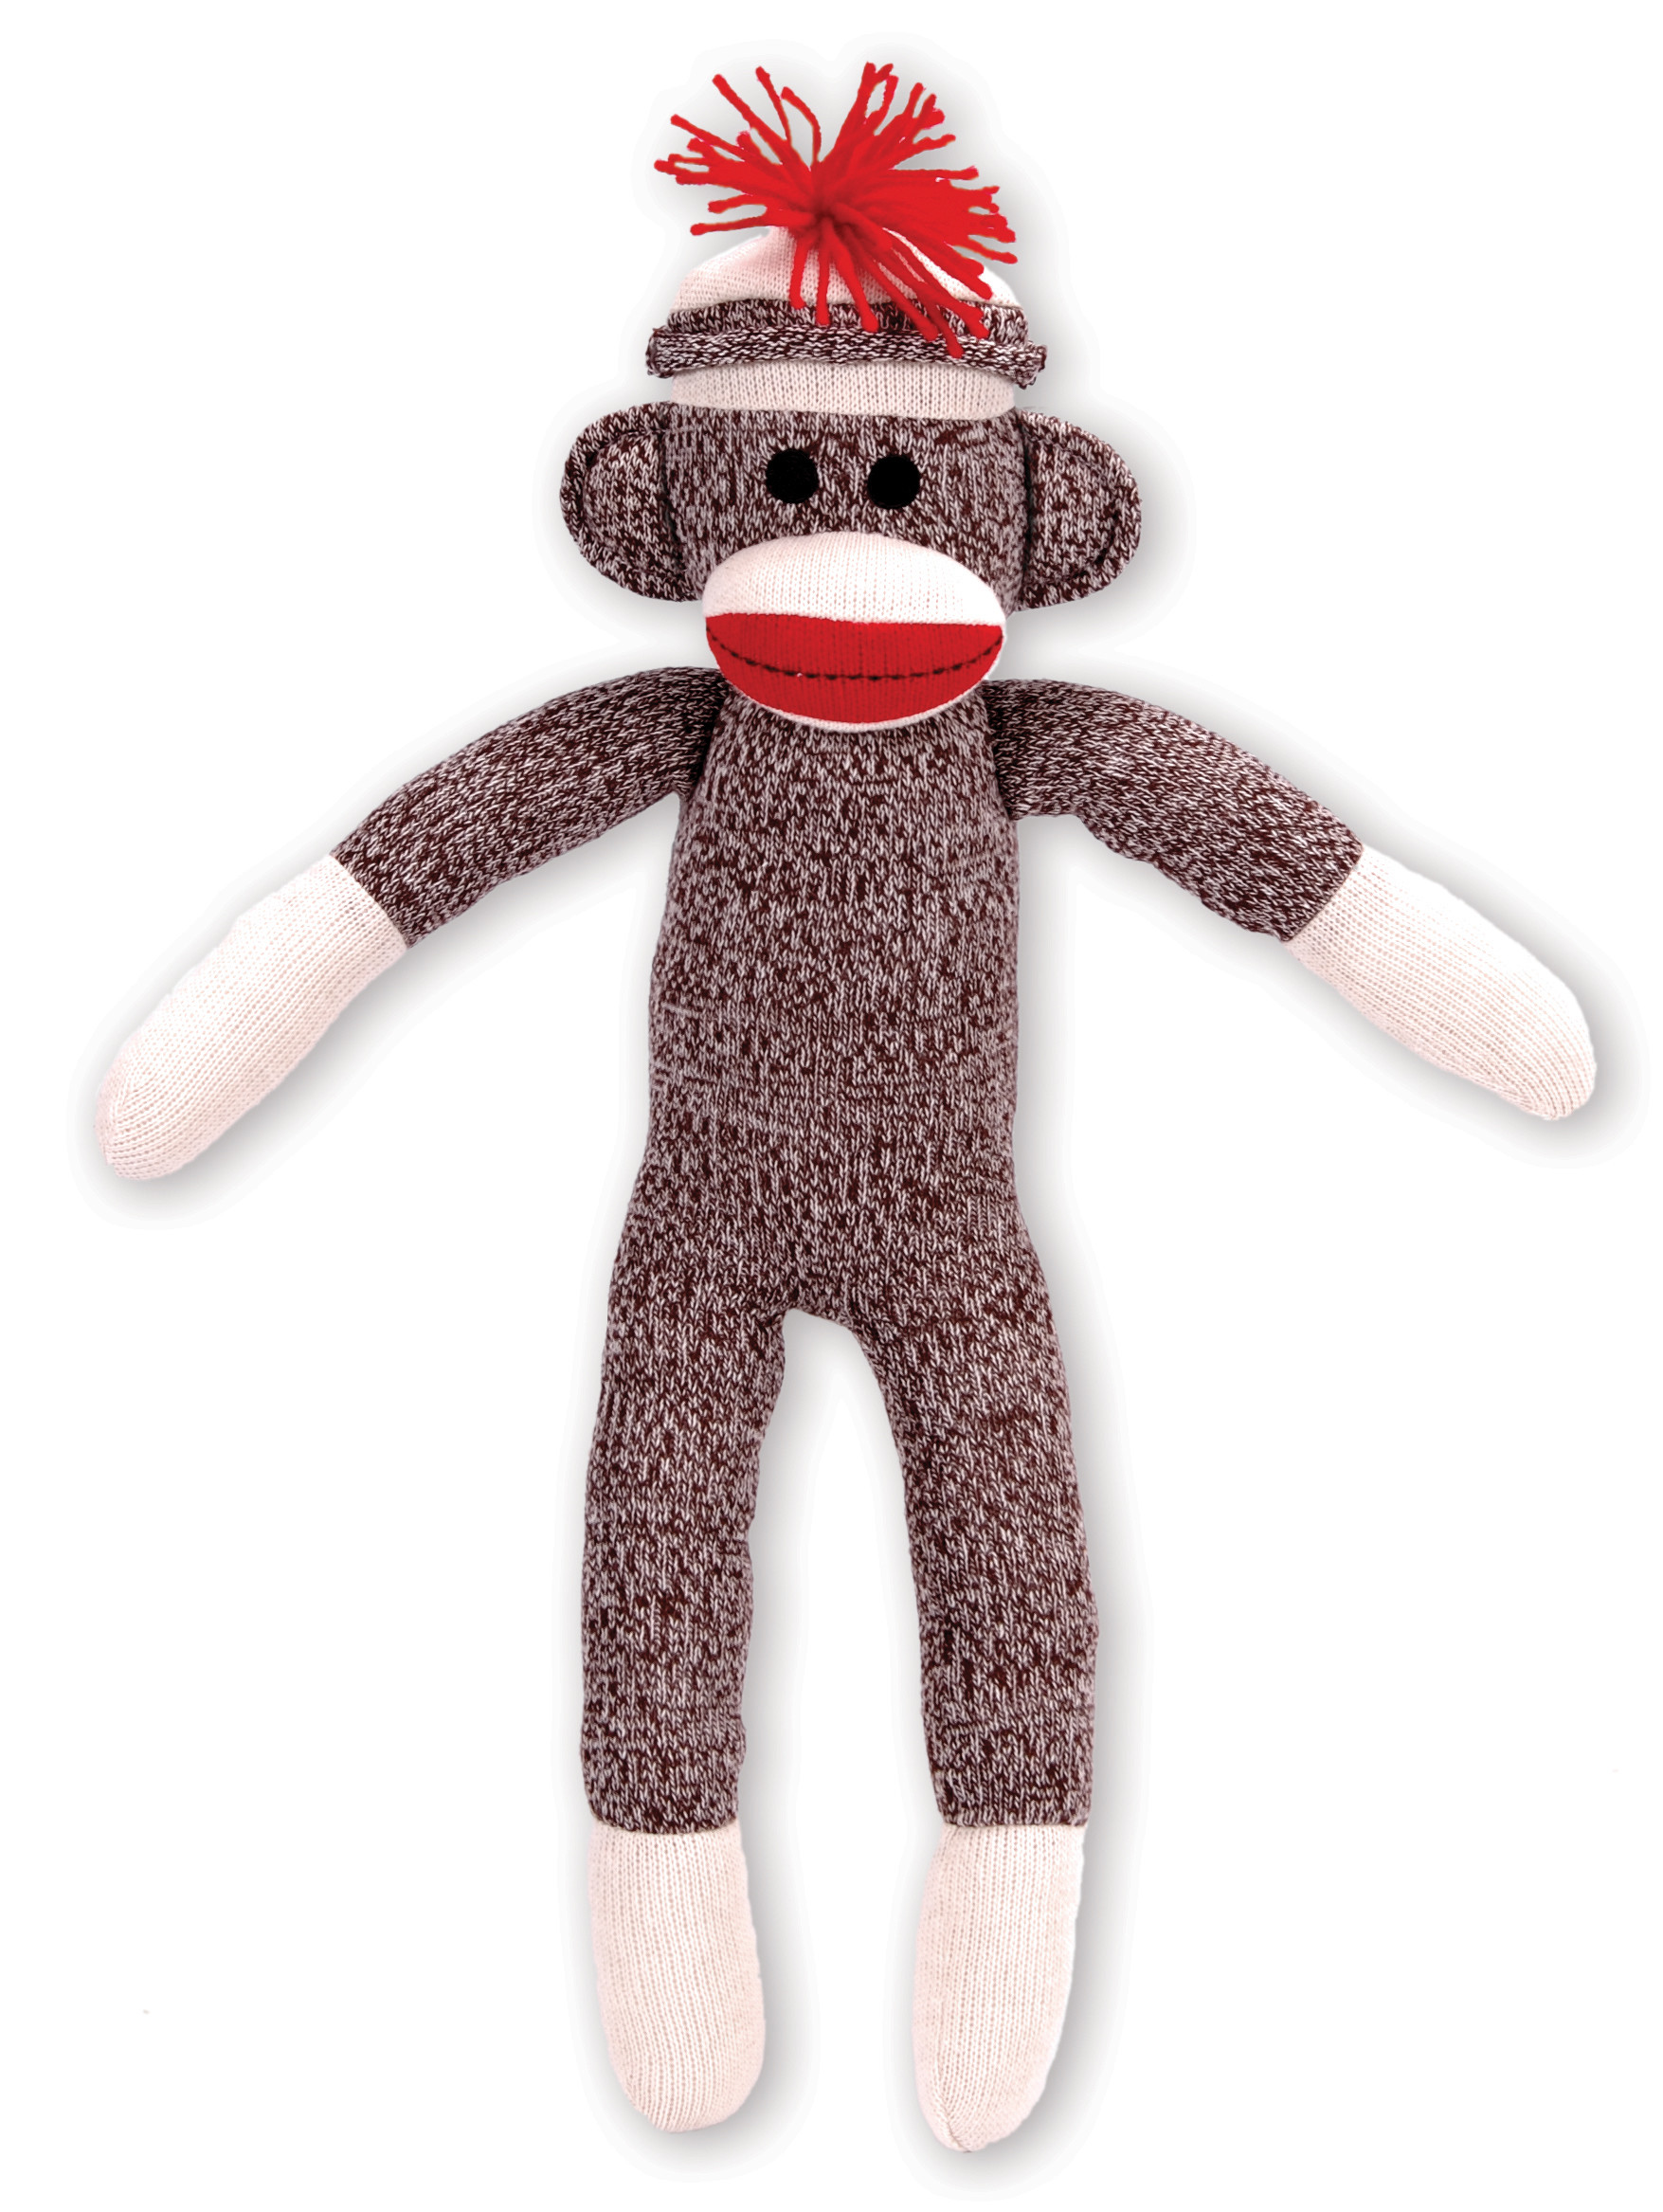 1755x2334 Sock Monkey. The traditional sock monkey which is brown, with red lips .